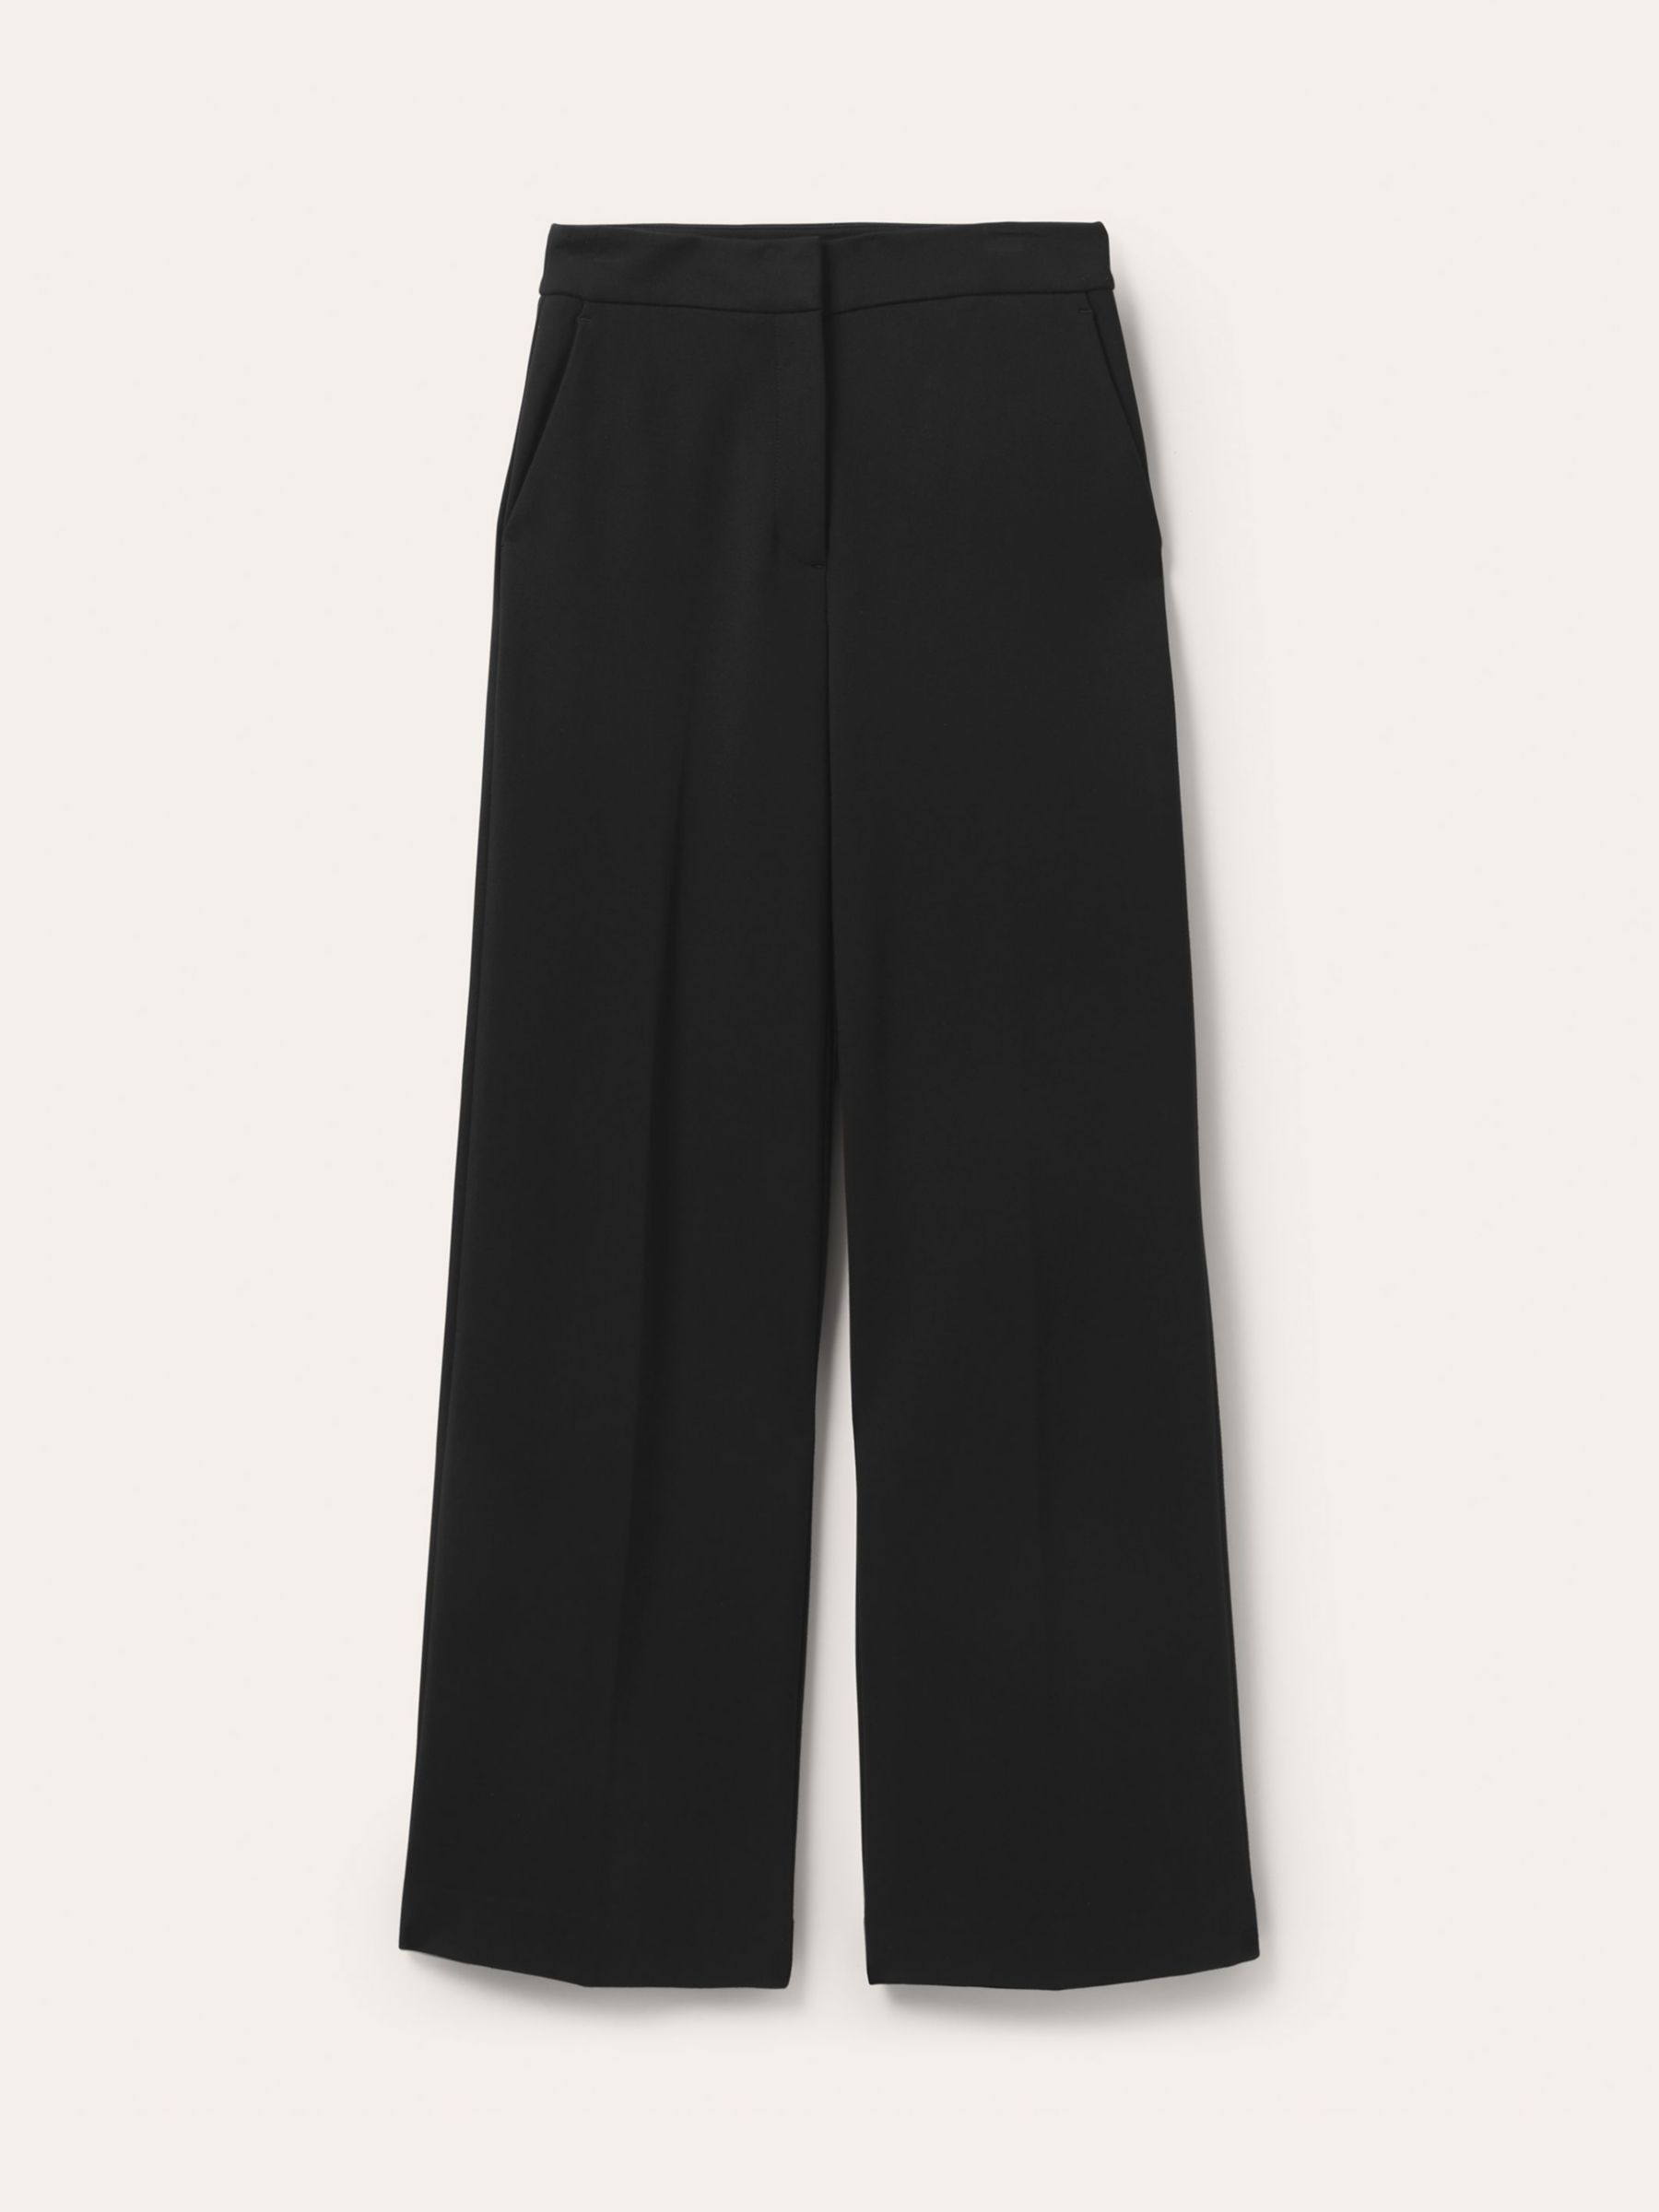 Boden Westbourne Ponte Trousers, Black, 8